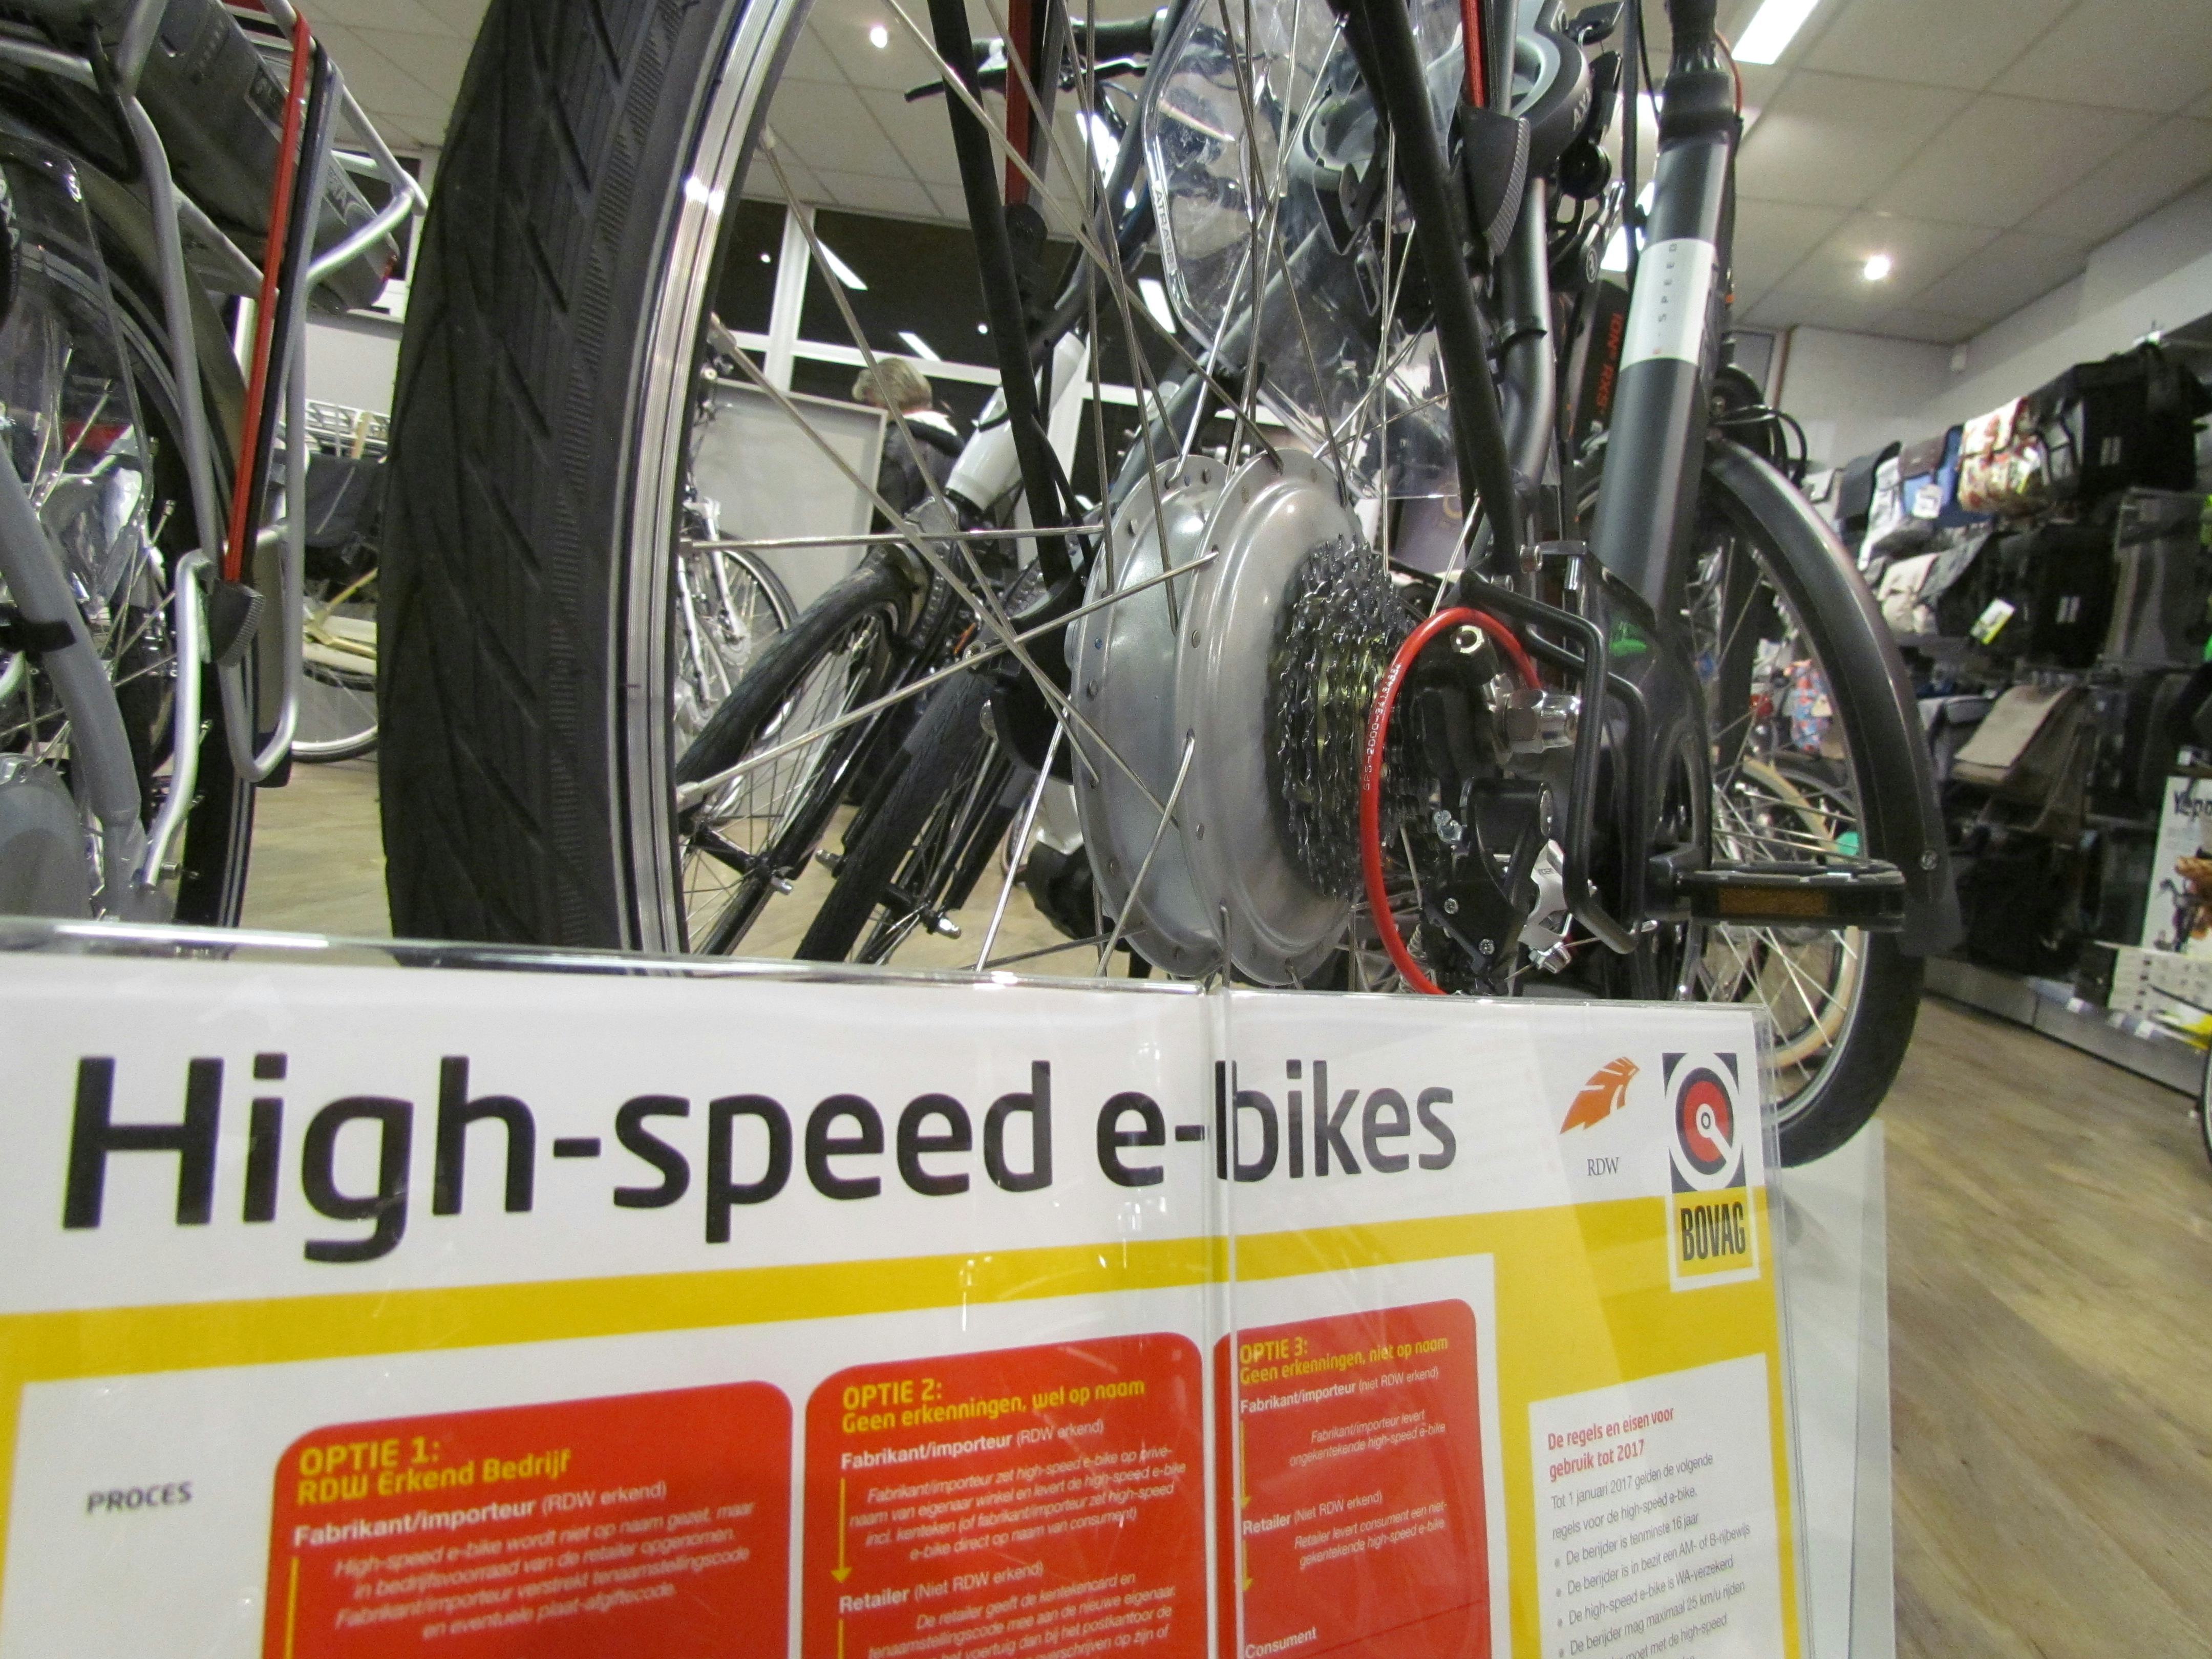 Notwithstanding the fact that the new type-approval became definitely effective for e-bikes on 1 January 2016 there is a transition period. – Photo Bike Europe